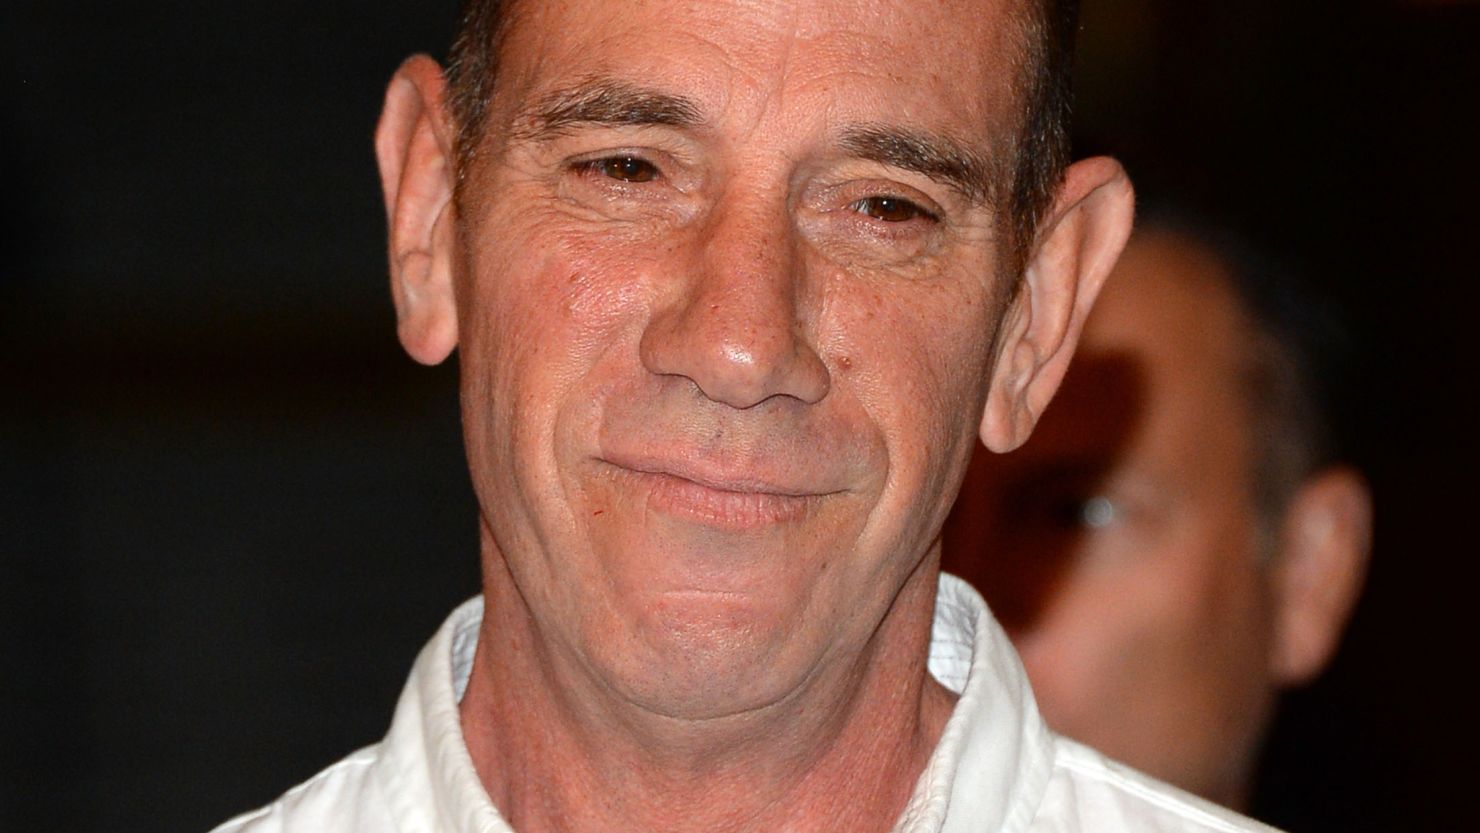 Actor Miguel Ferrer seen in 2013 at an event to mark the 100th episode of CBS' "NCIS: Los Angeles."